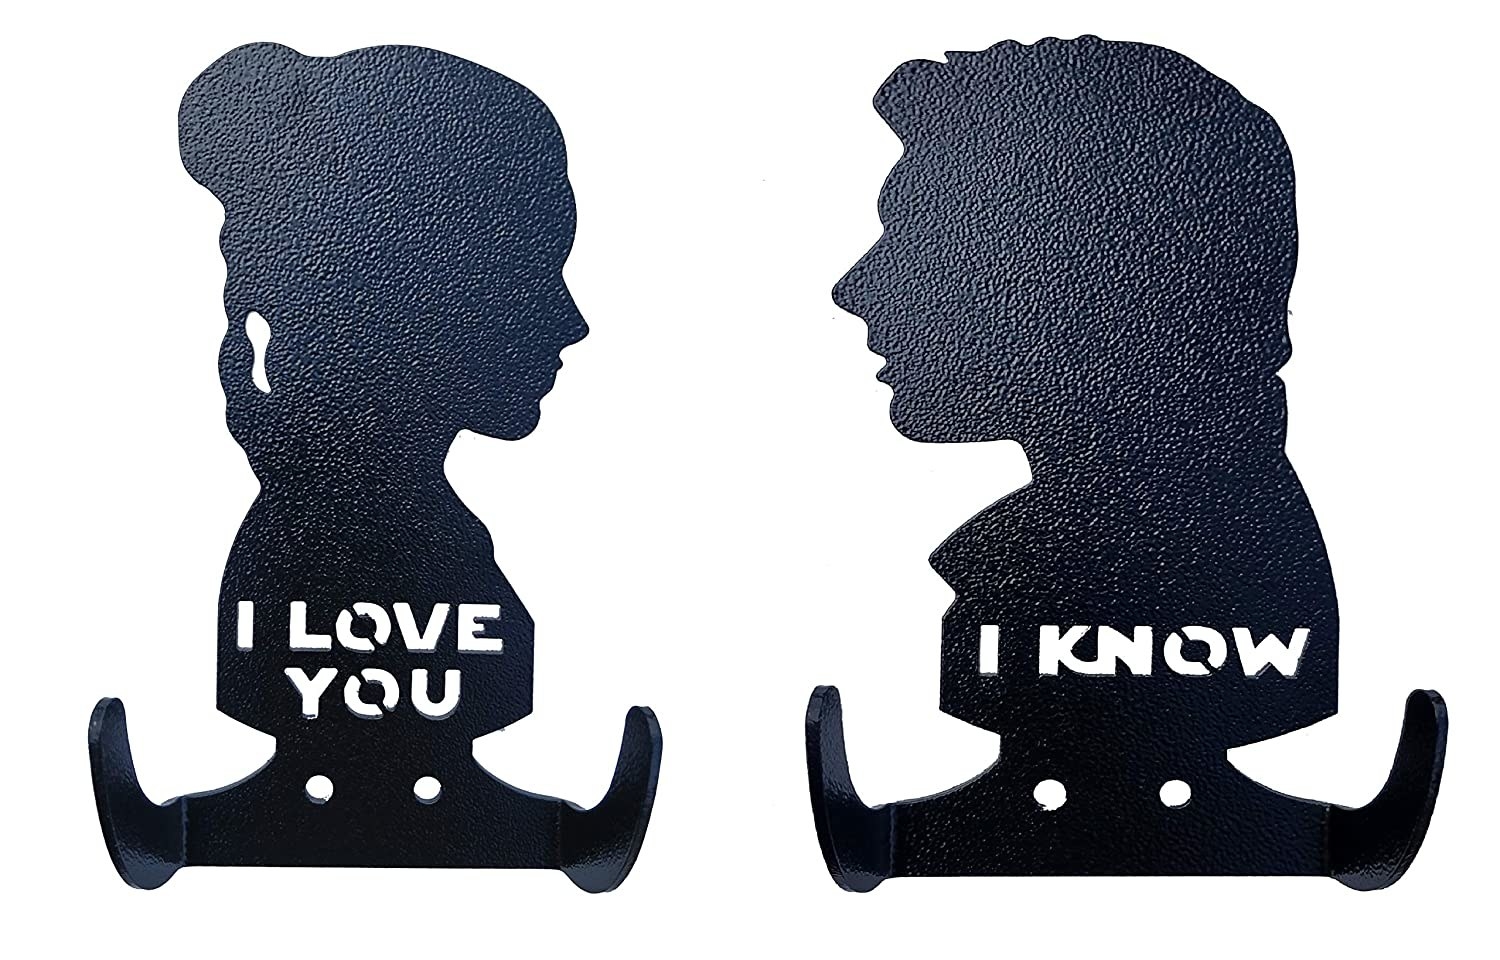 A set of hook hangers with Han and Leia on them